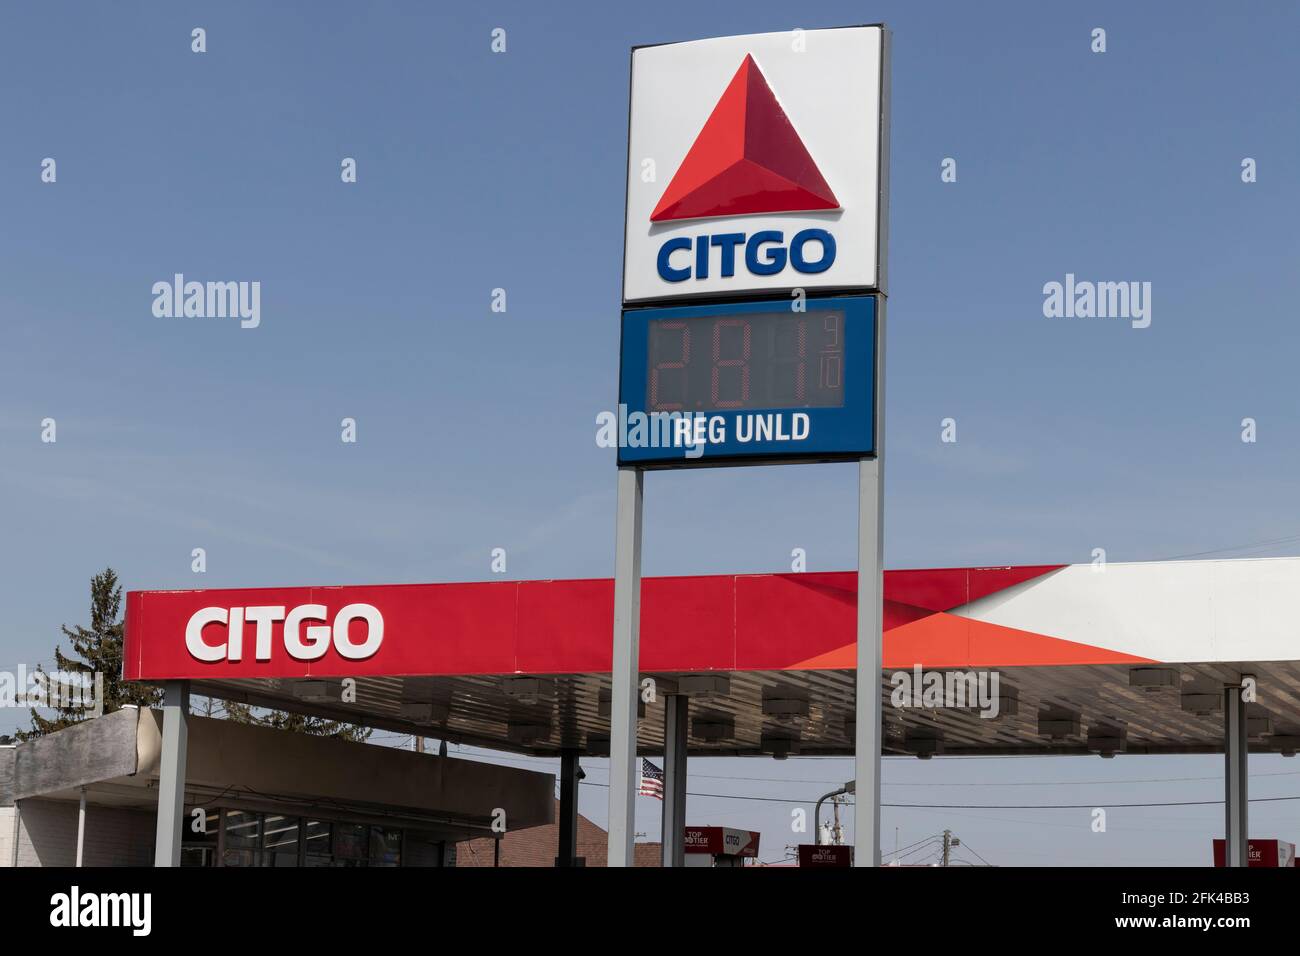 Wabash - Circa April 2021: Citgo Retail Gas and Petrol Station. Citgo is a refiner, transporter and marketer of gas and petrochemicals. Stock Photo